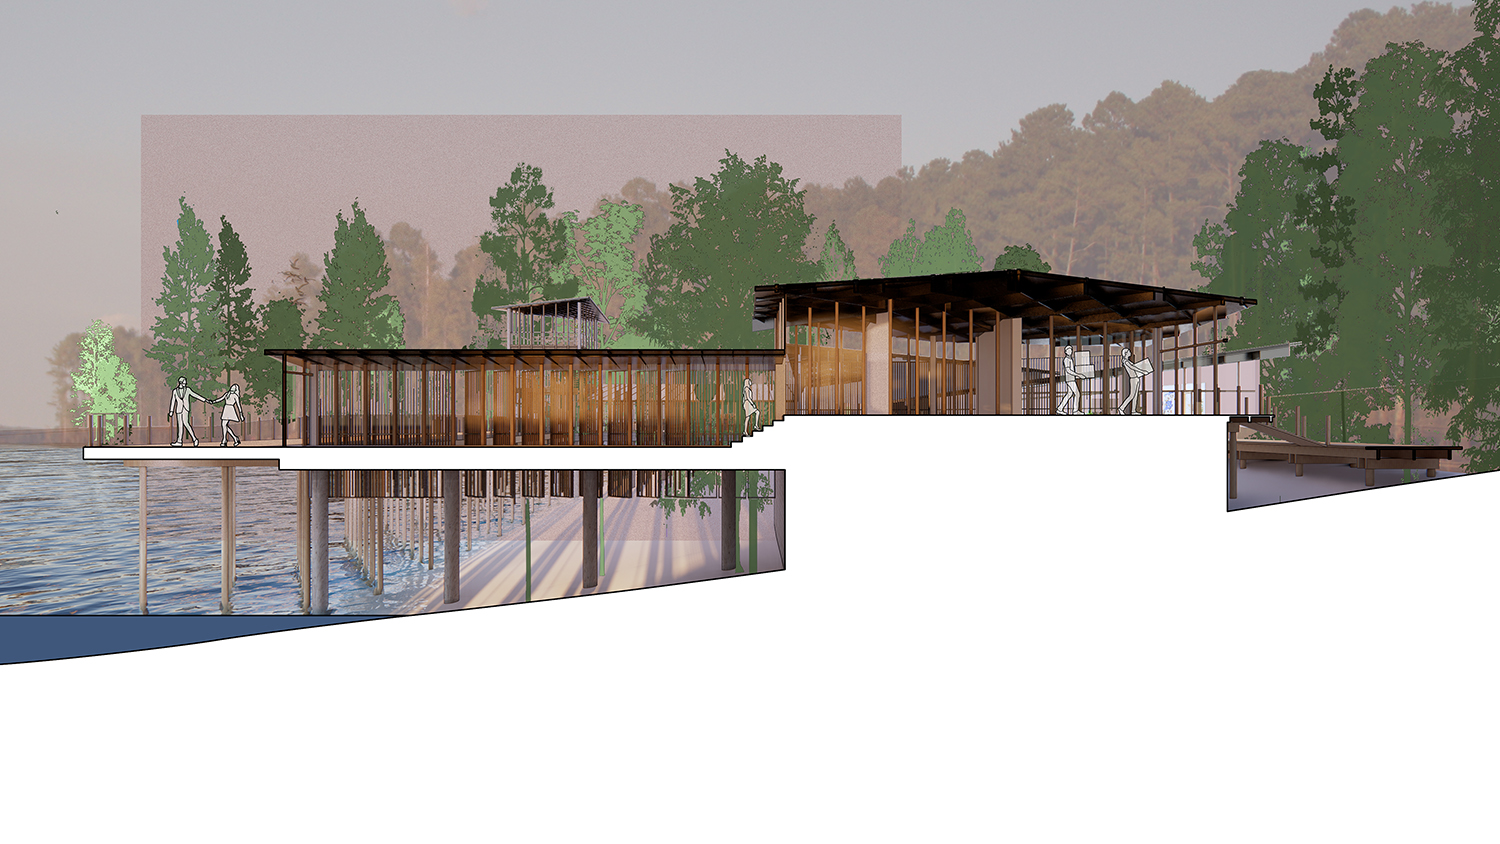 By Grace Polo-Wood Course ID: ARC 301  The Jordan Lake Audubon Center is a quiet place for people of all ages to enjoy the thrilling hobby of bird watching. The program includes educational spaces and a viewing tower surrounding a central courtyard-like space on the beach.